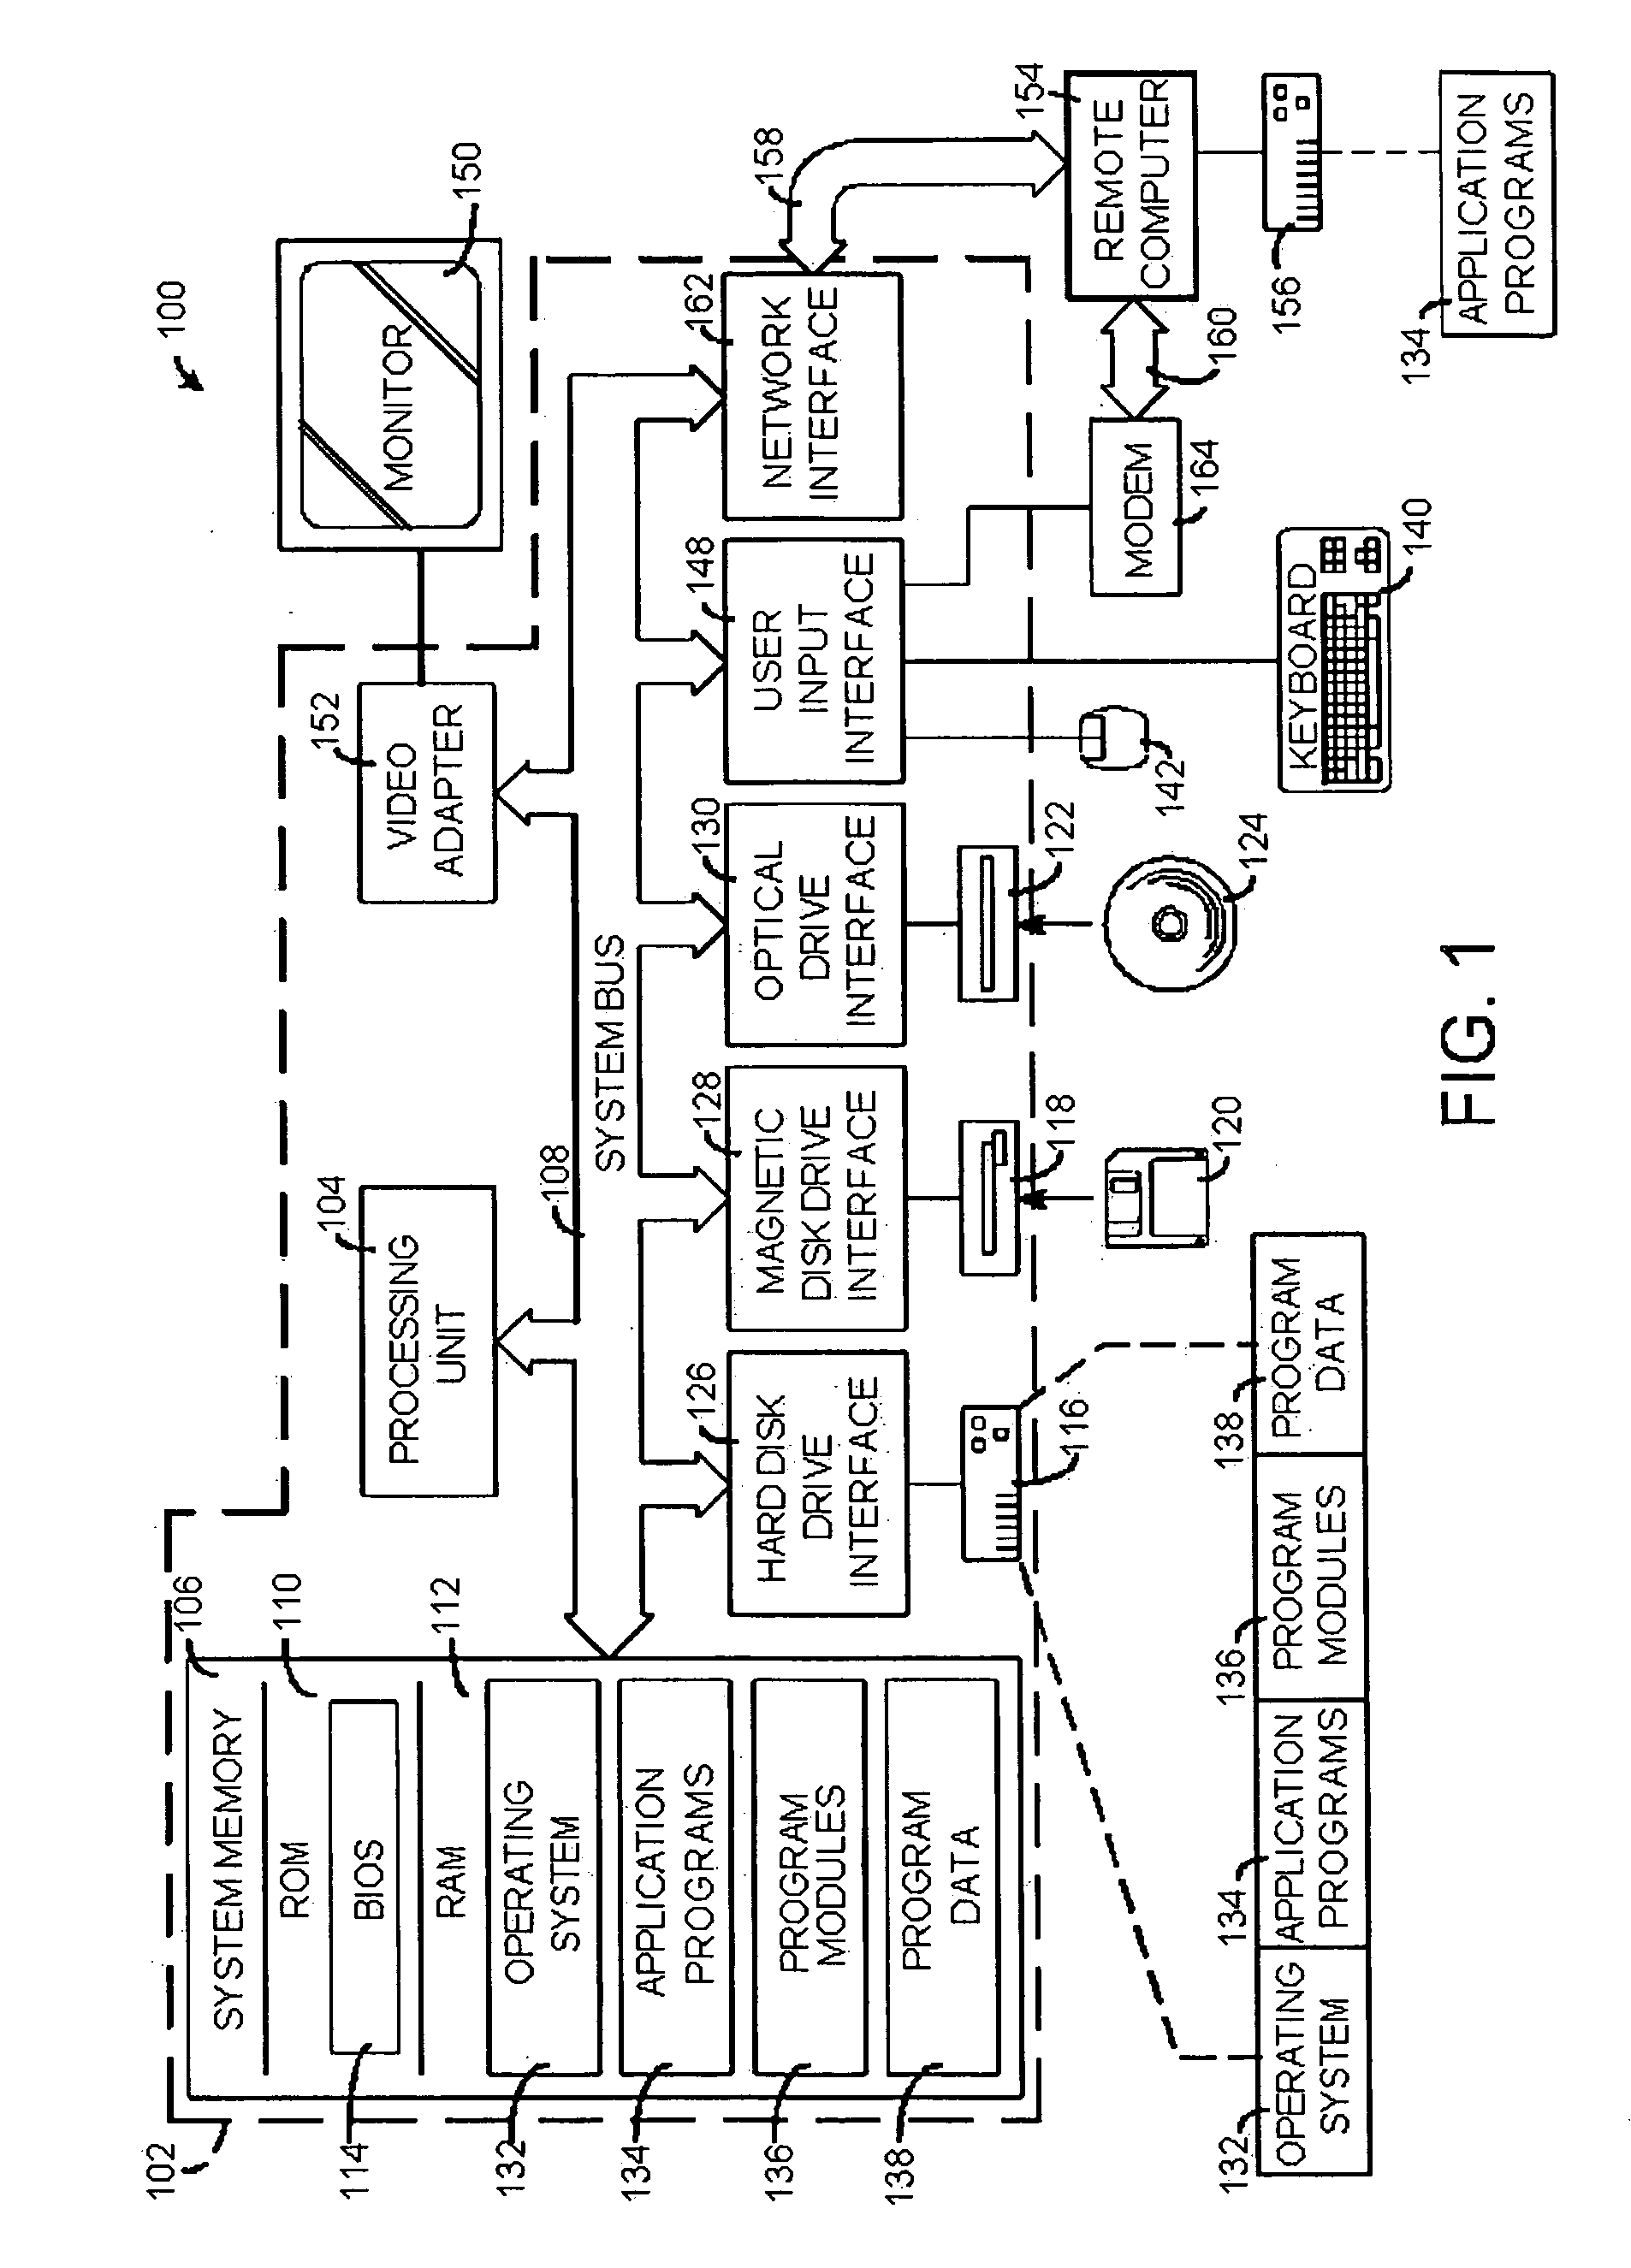 Method and system for creating and maintaining version-specific properties in a file